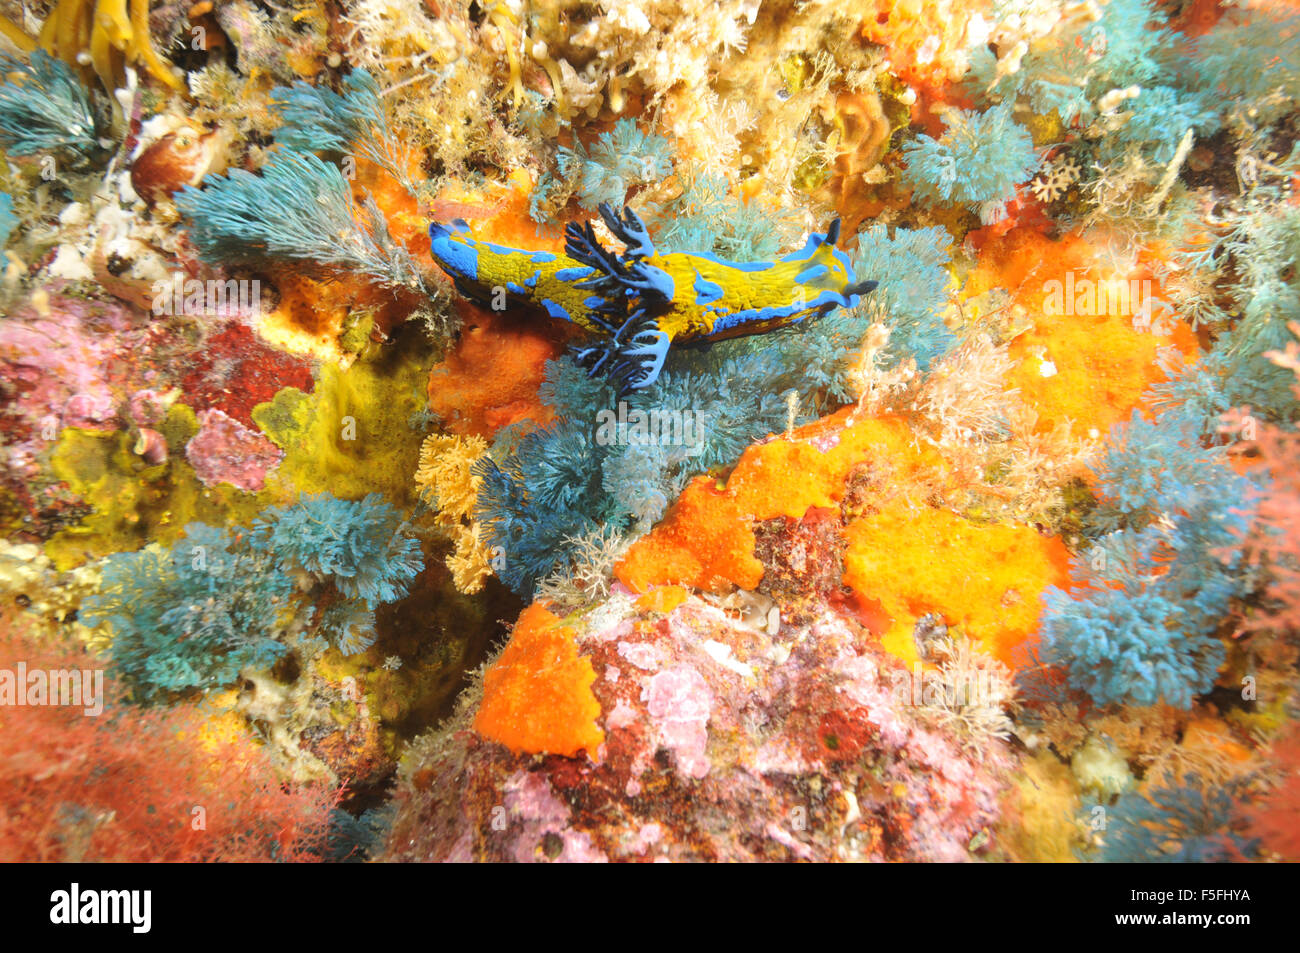 Verco's nudibranch, Tambja verconis, in a colorful rocky wall of sponges, ascidians and coral, Poor Knights Islands Nature Reser Stock Photo